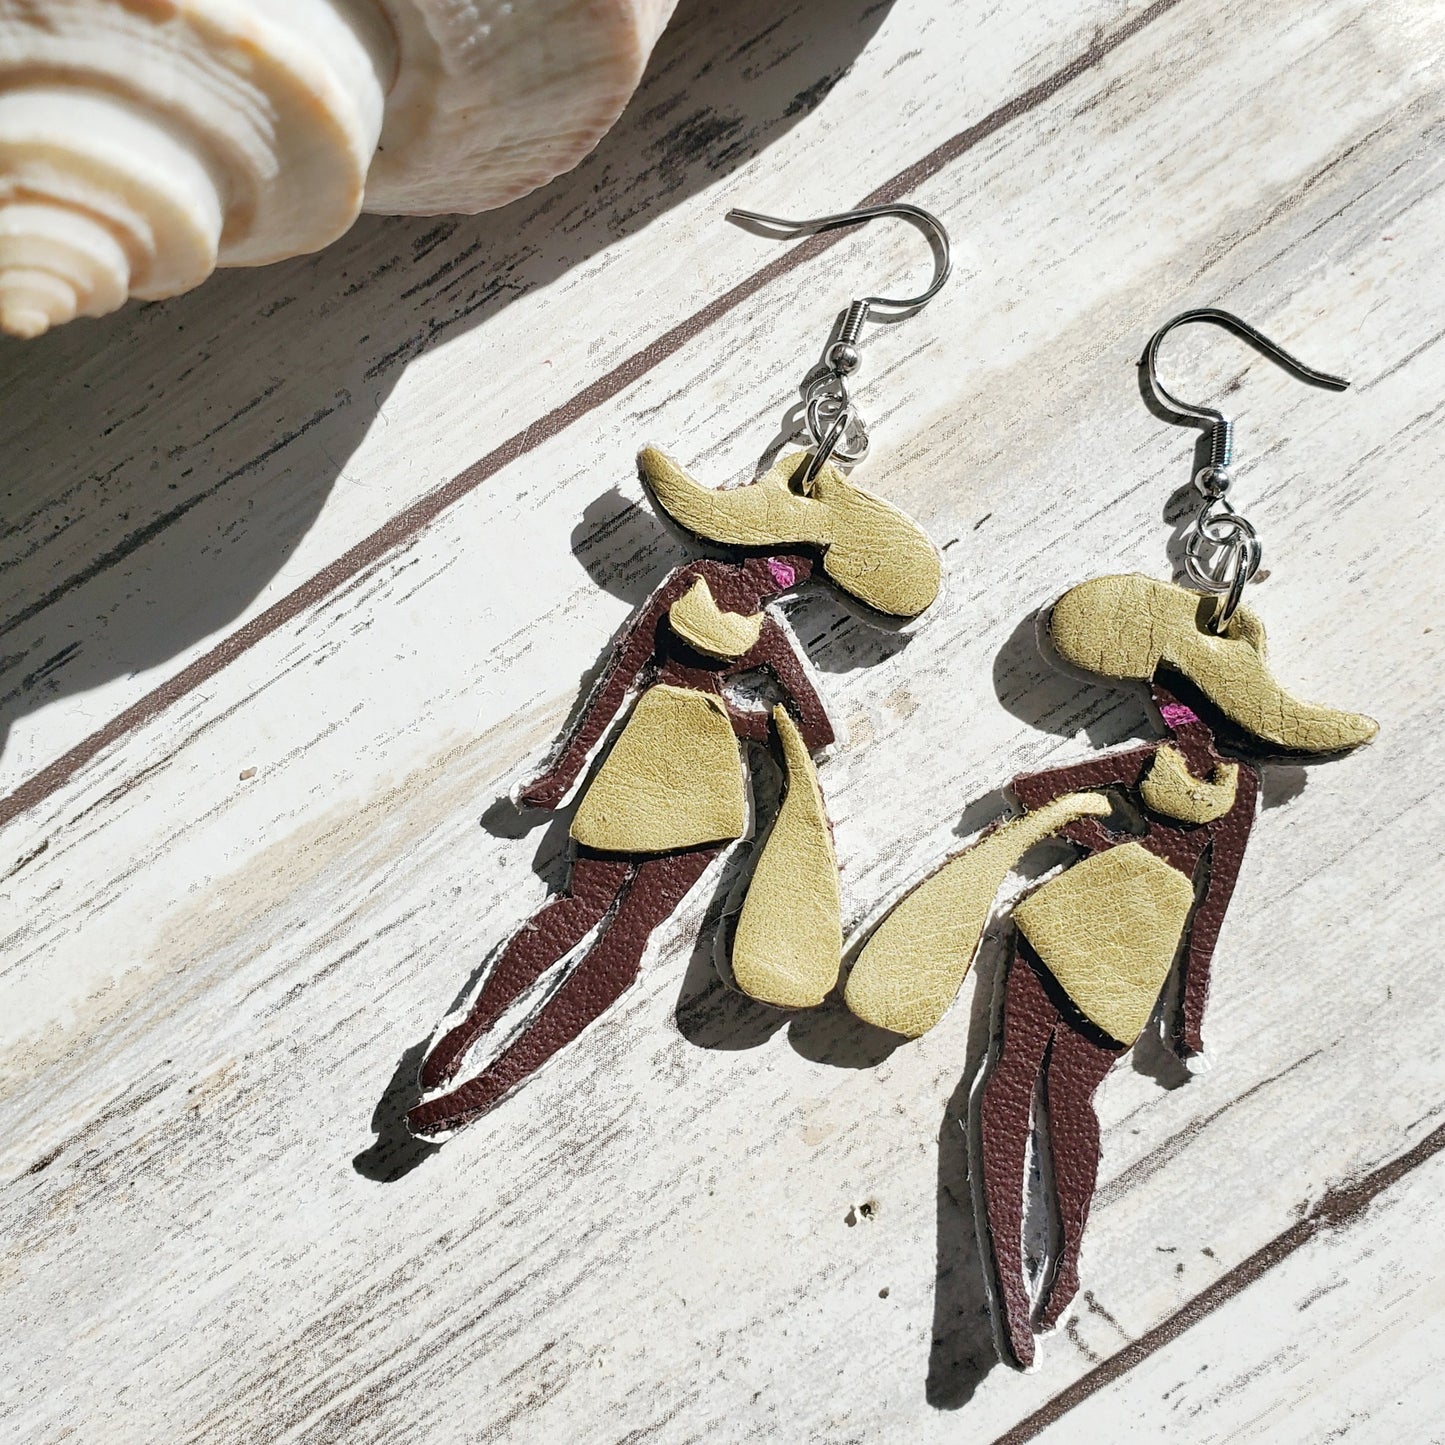 Beach Babes - leather earrings - layered leather earrings - beach earrings - vacation earrings - themed earrings